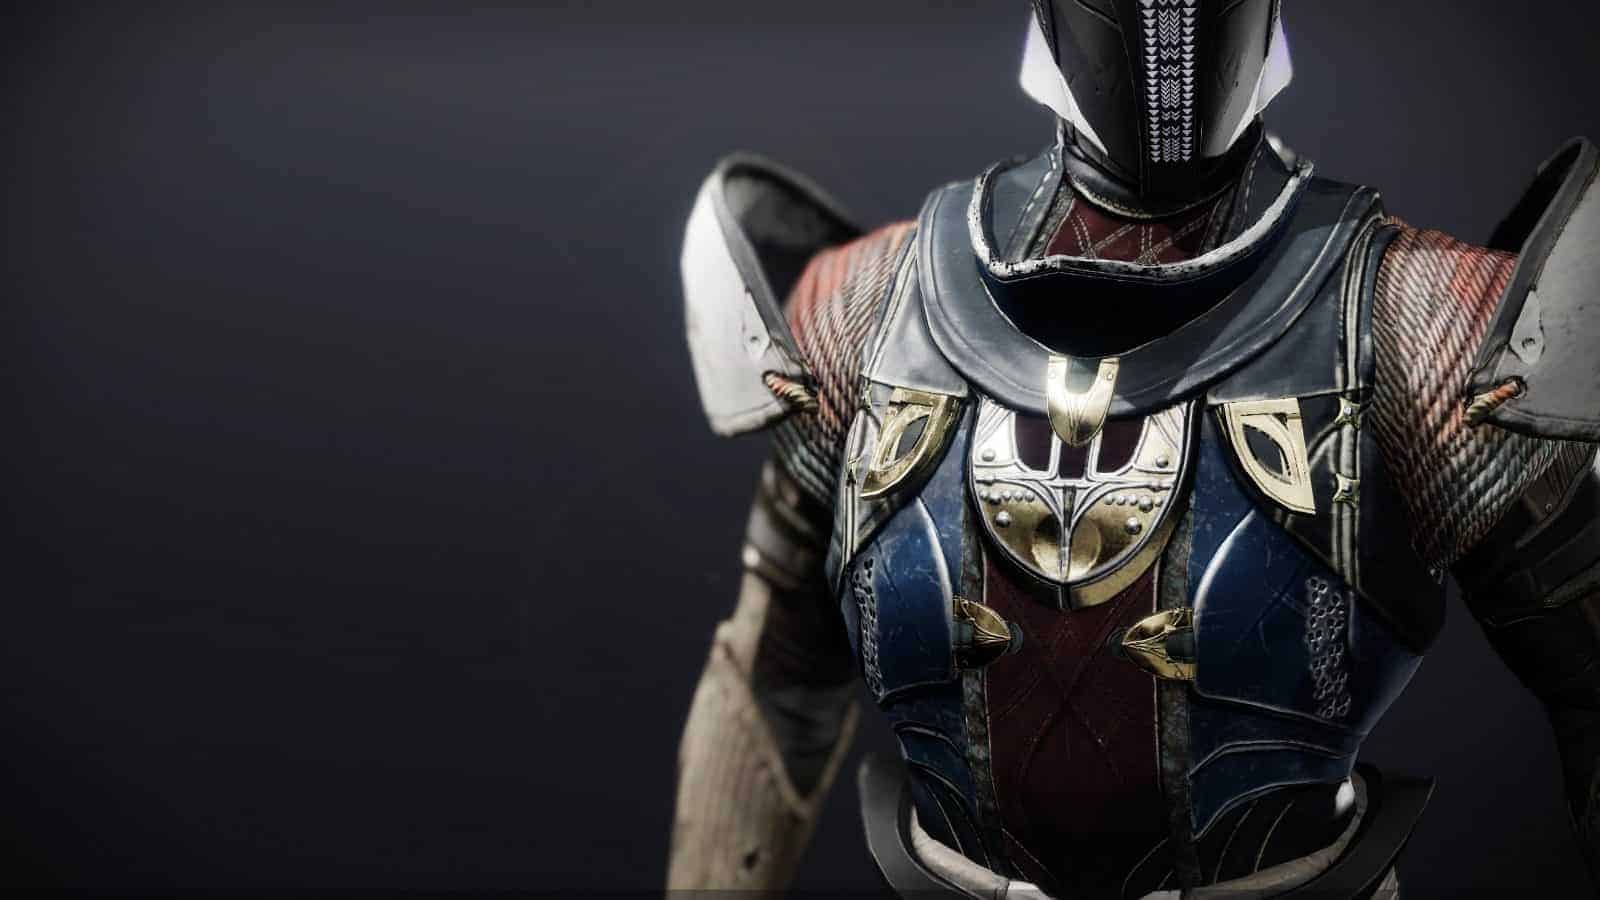 Plate of the Great Hunt Destiny 2 featured